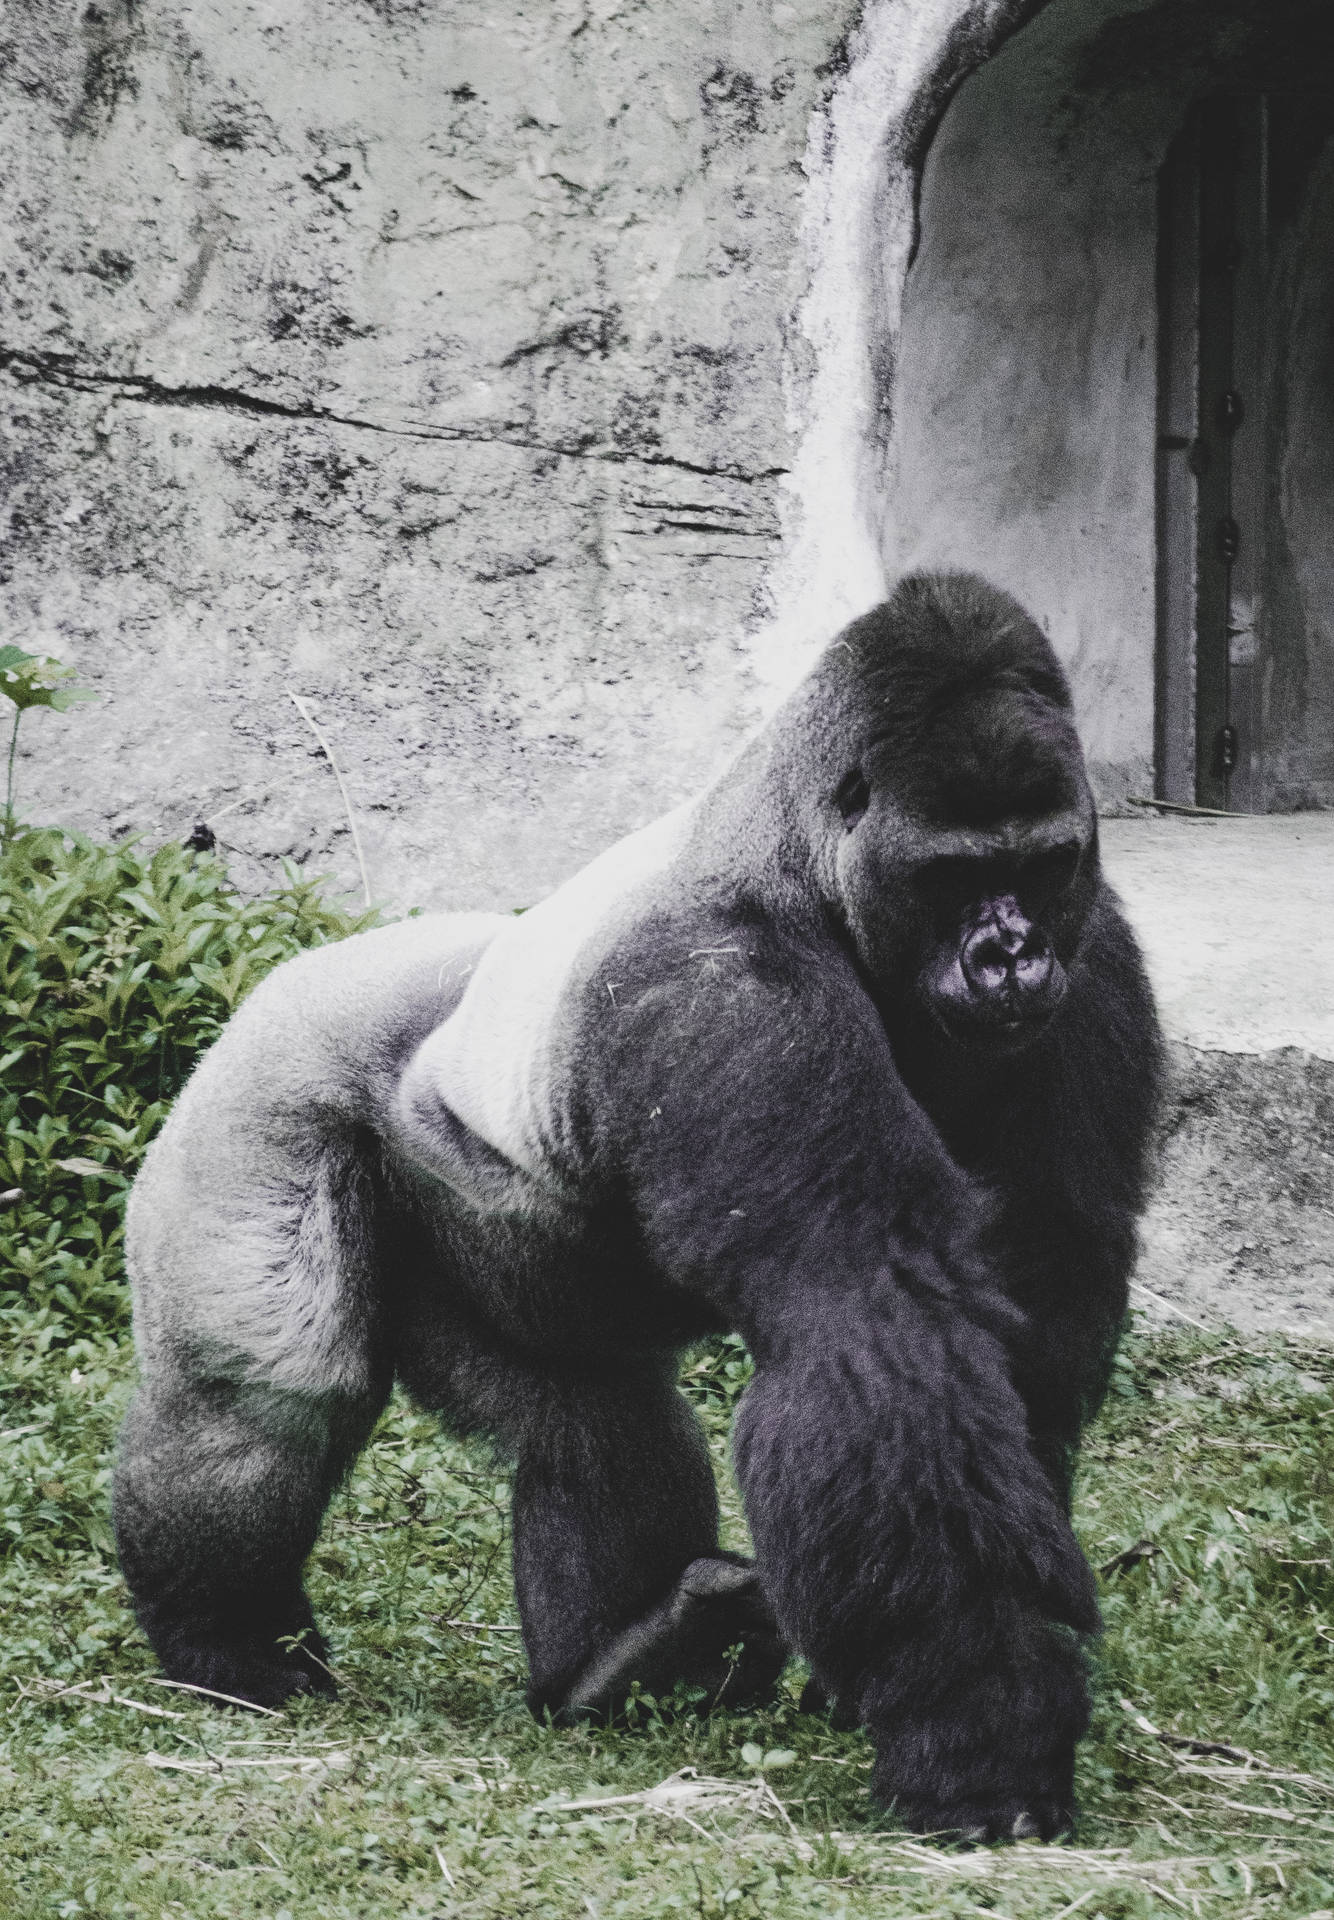 Gorilla 2617X3766 Wallpaper and Background Image